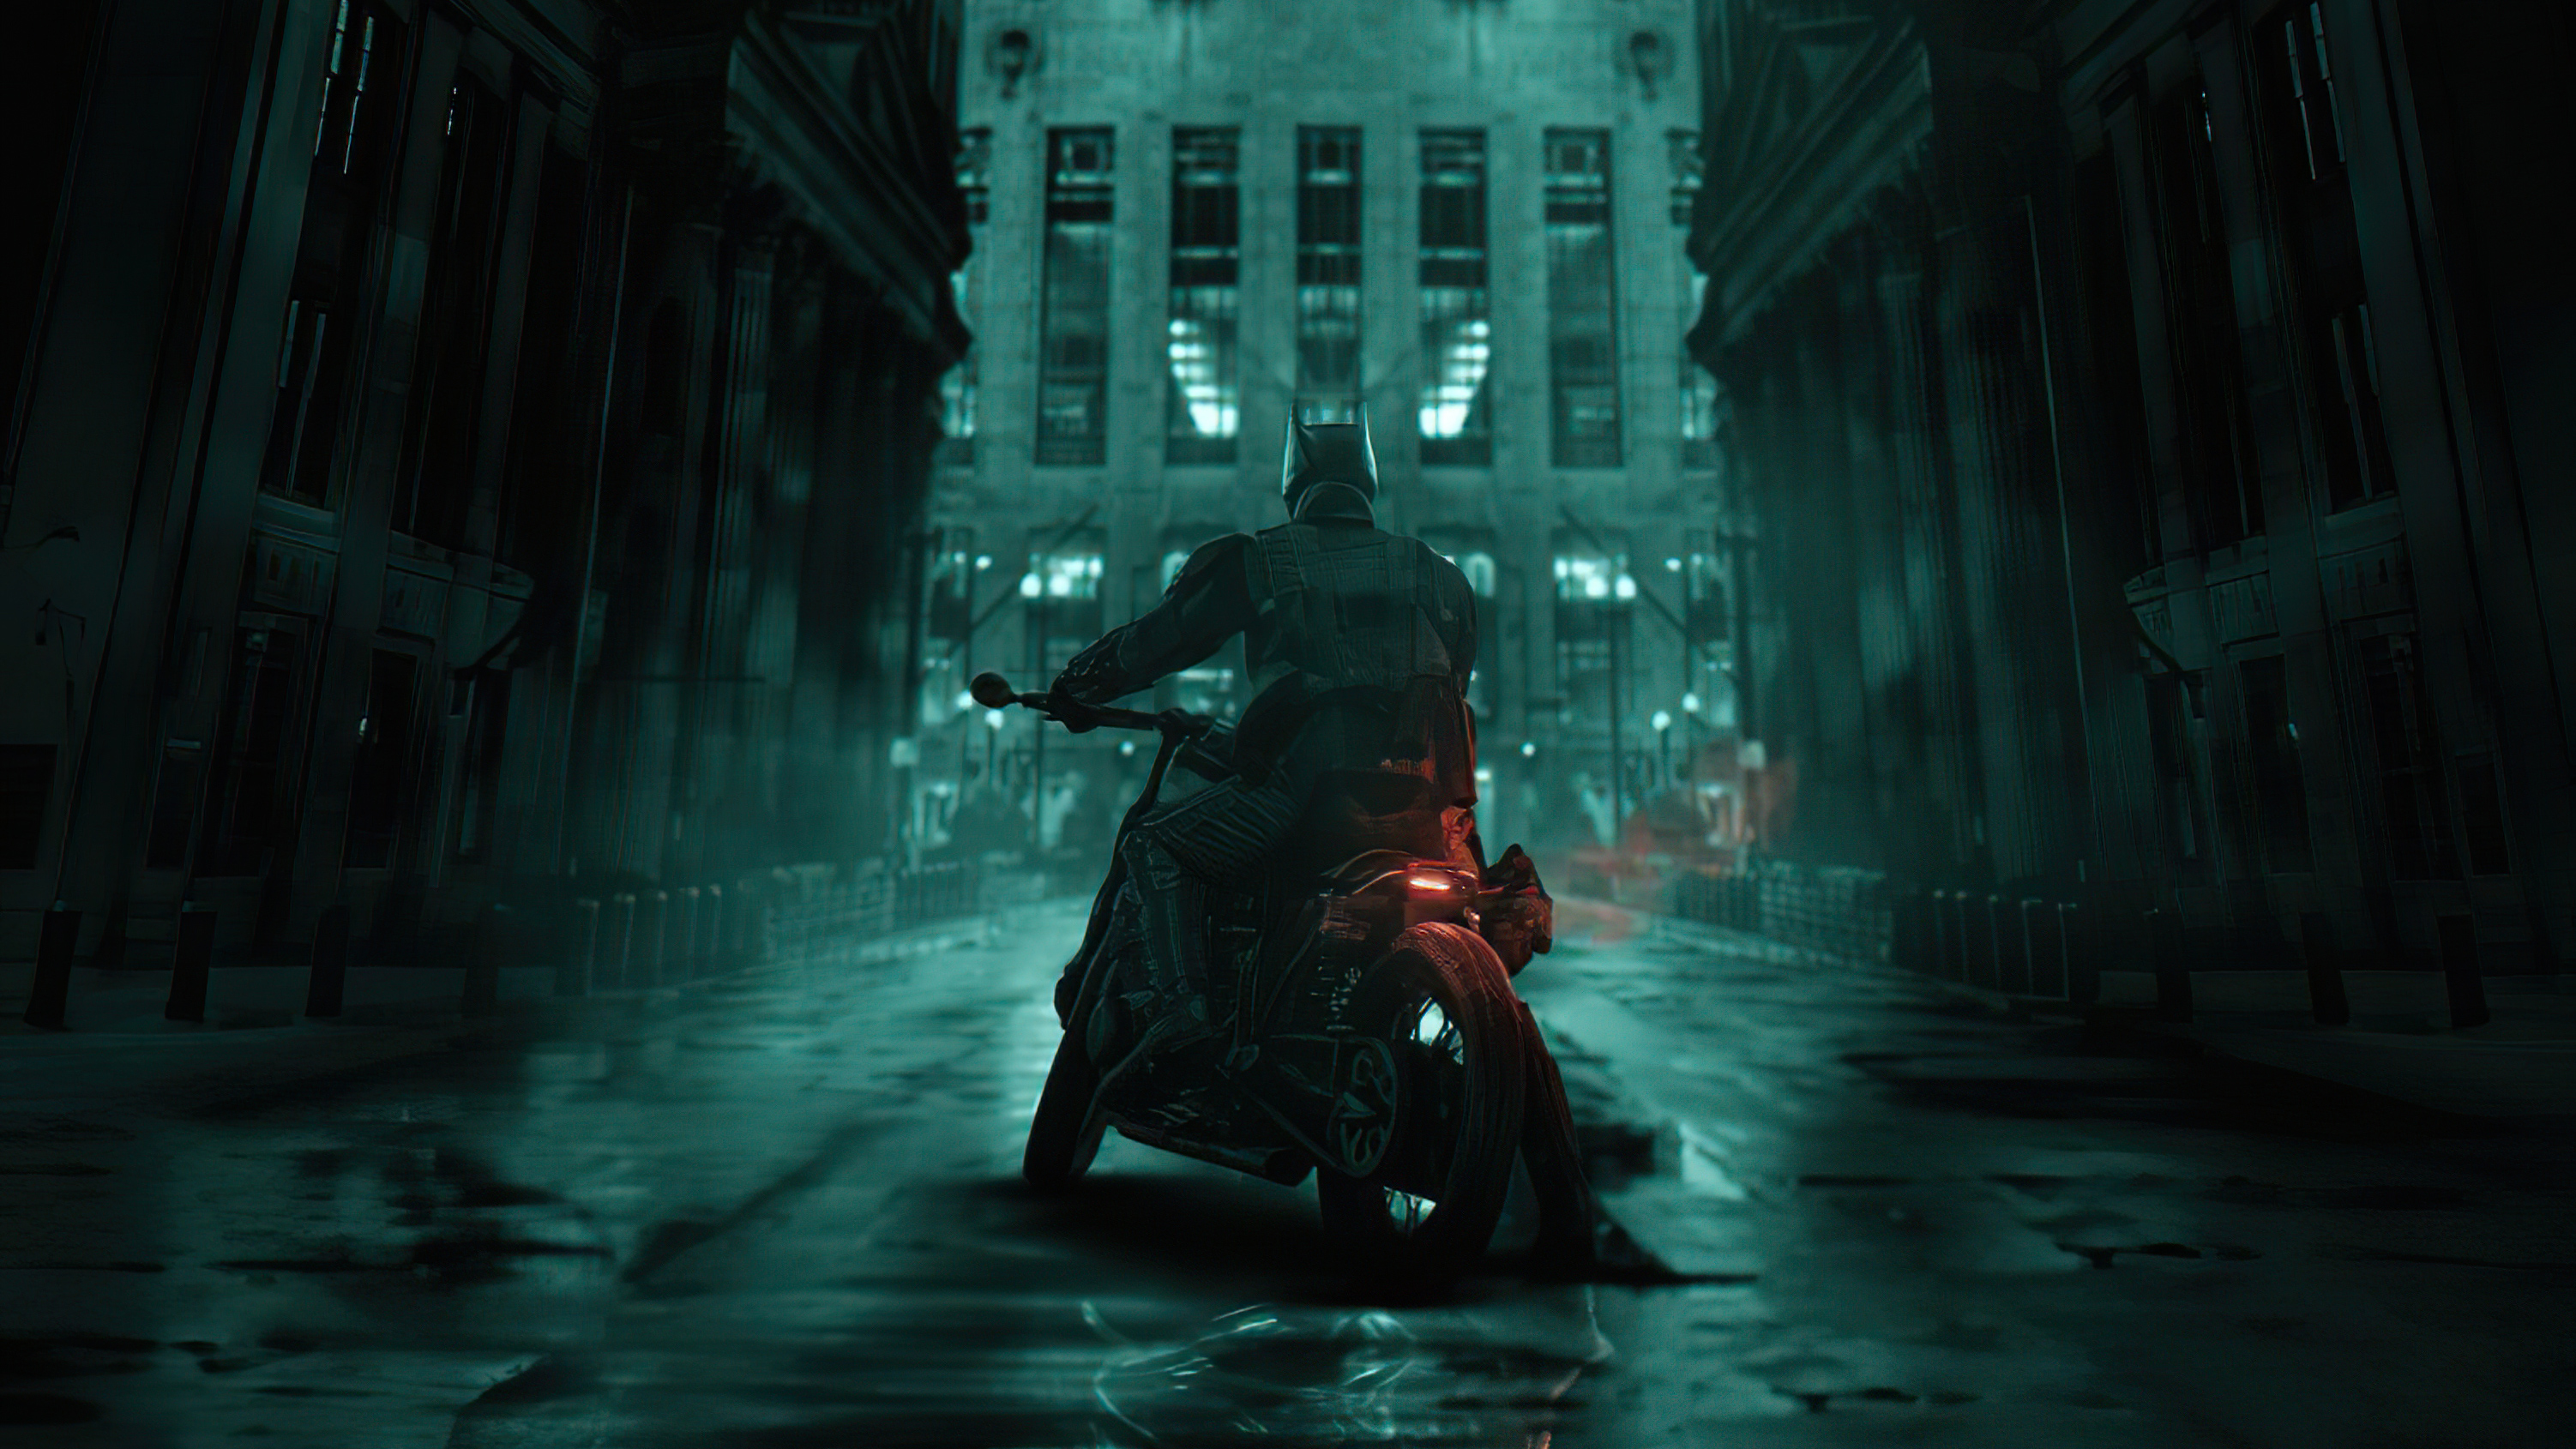 The Batman On Bike 2021, HD Movies, 4k Wallpapers, Images, Backgrounds,  Photos and Pictures